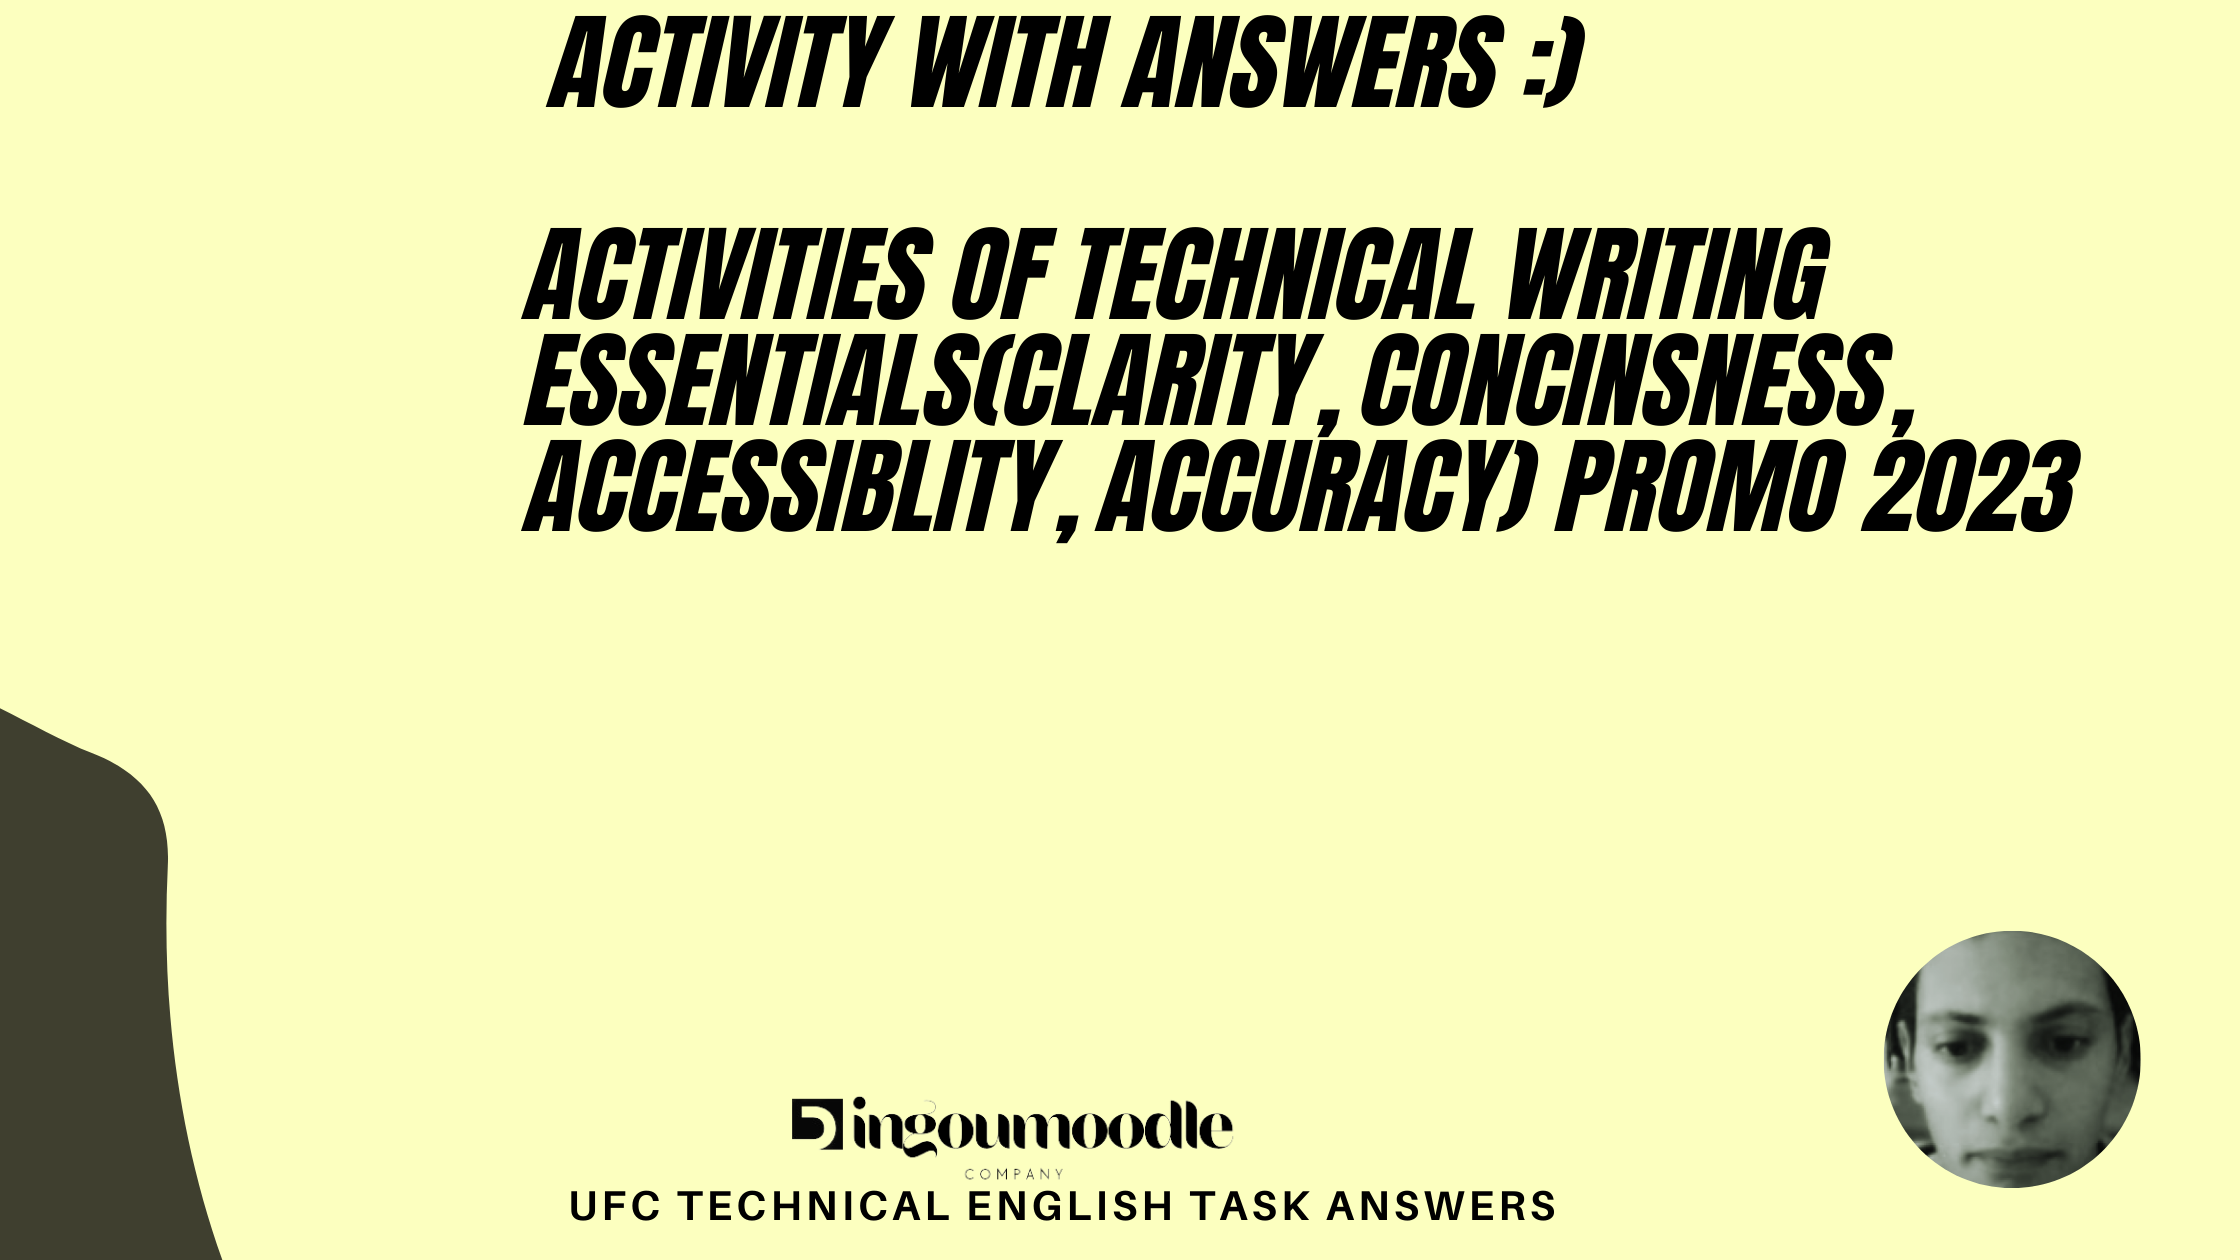 Activities in Technical Writing Essentials(Clarity, Concinsness, Accessiblity, Accuracy) promo 2023